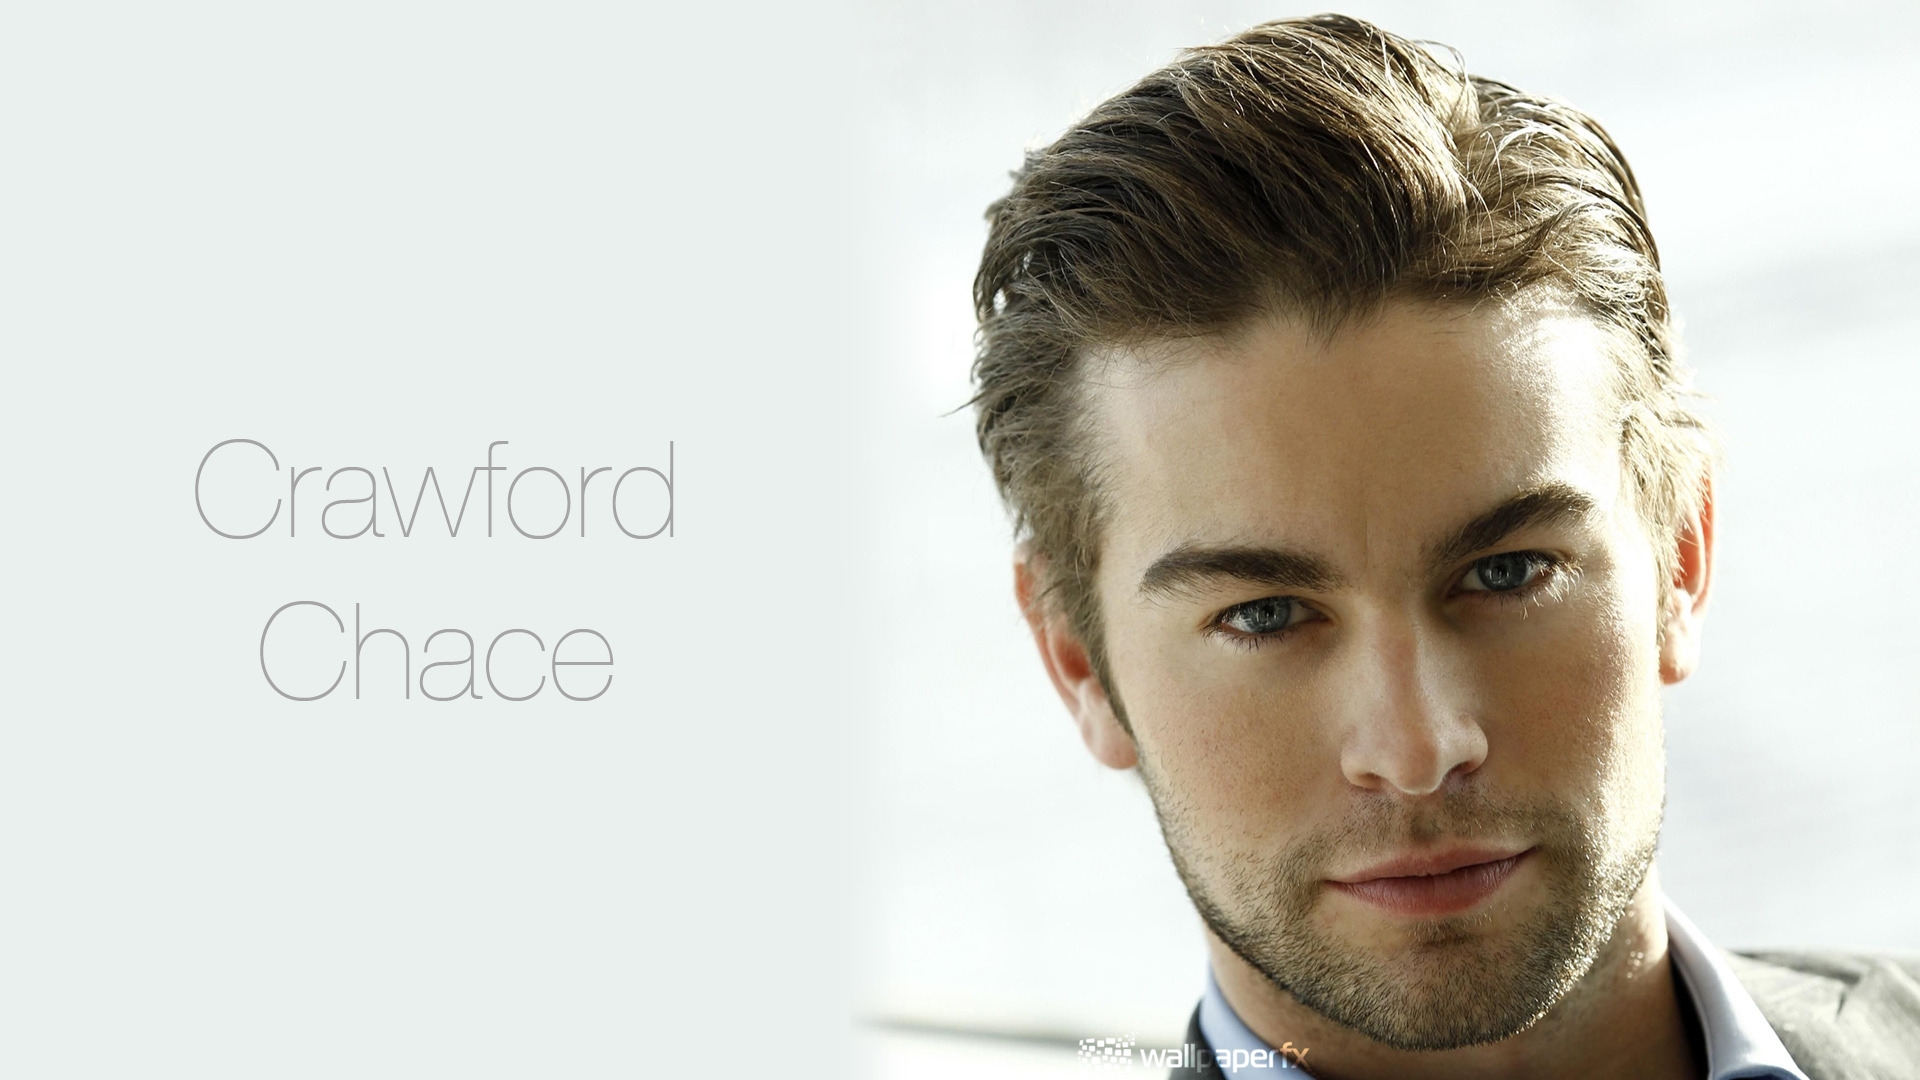 Chace Crawford Handsome for 1920 x 1080 HDTV 1080p resolution